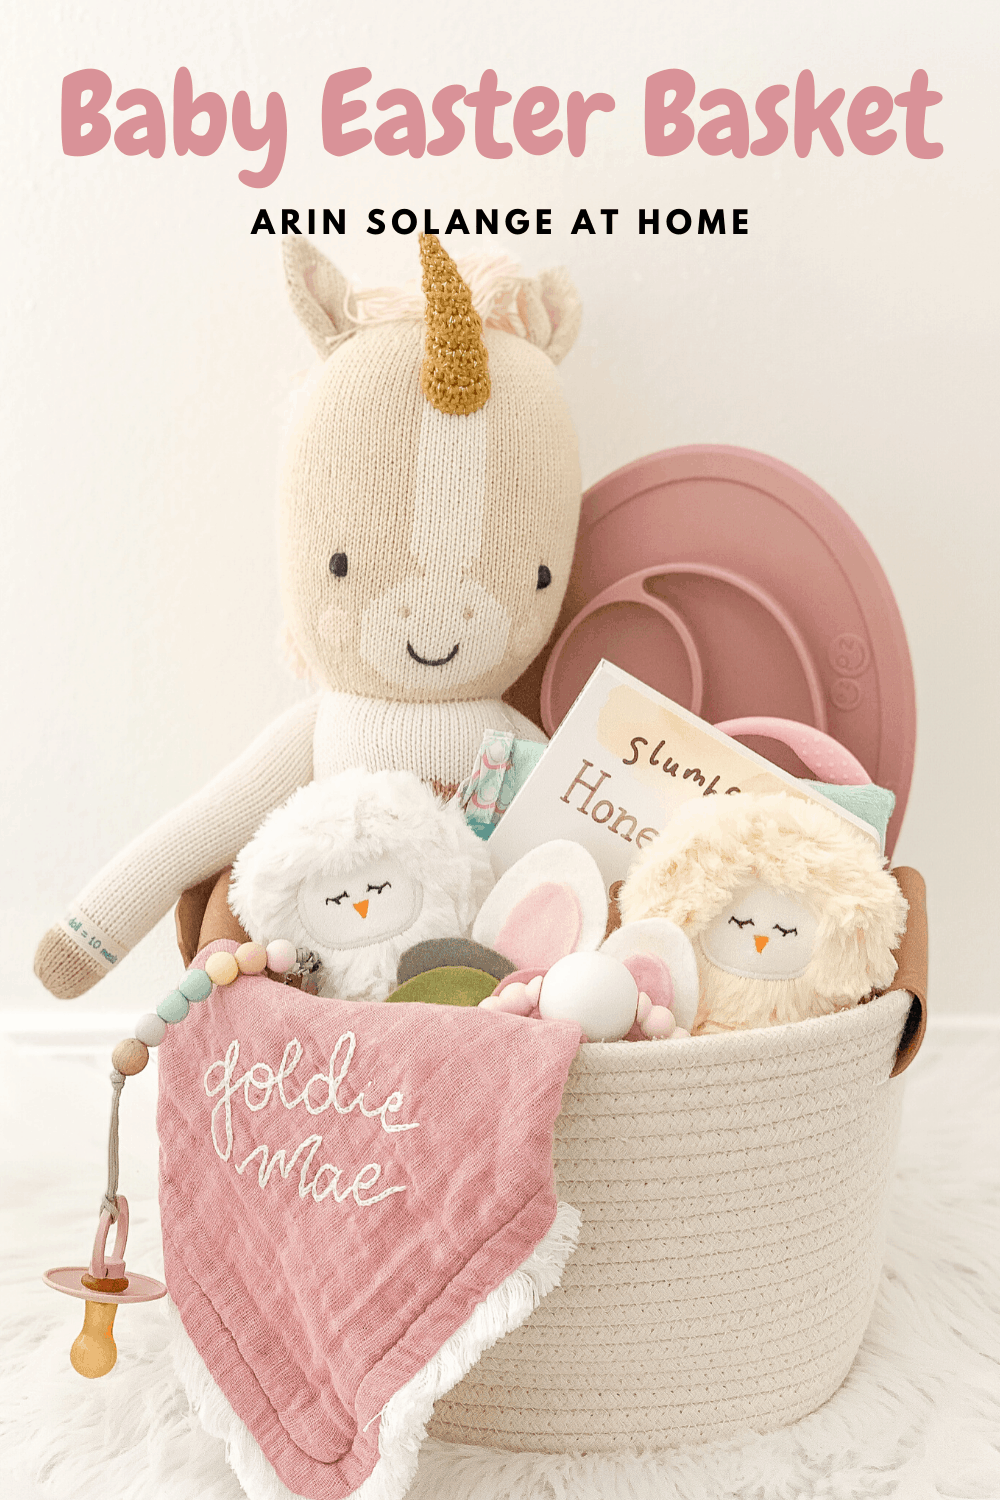 Baby Easter Basket for a girl